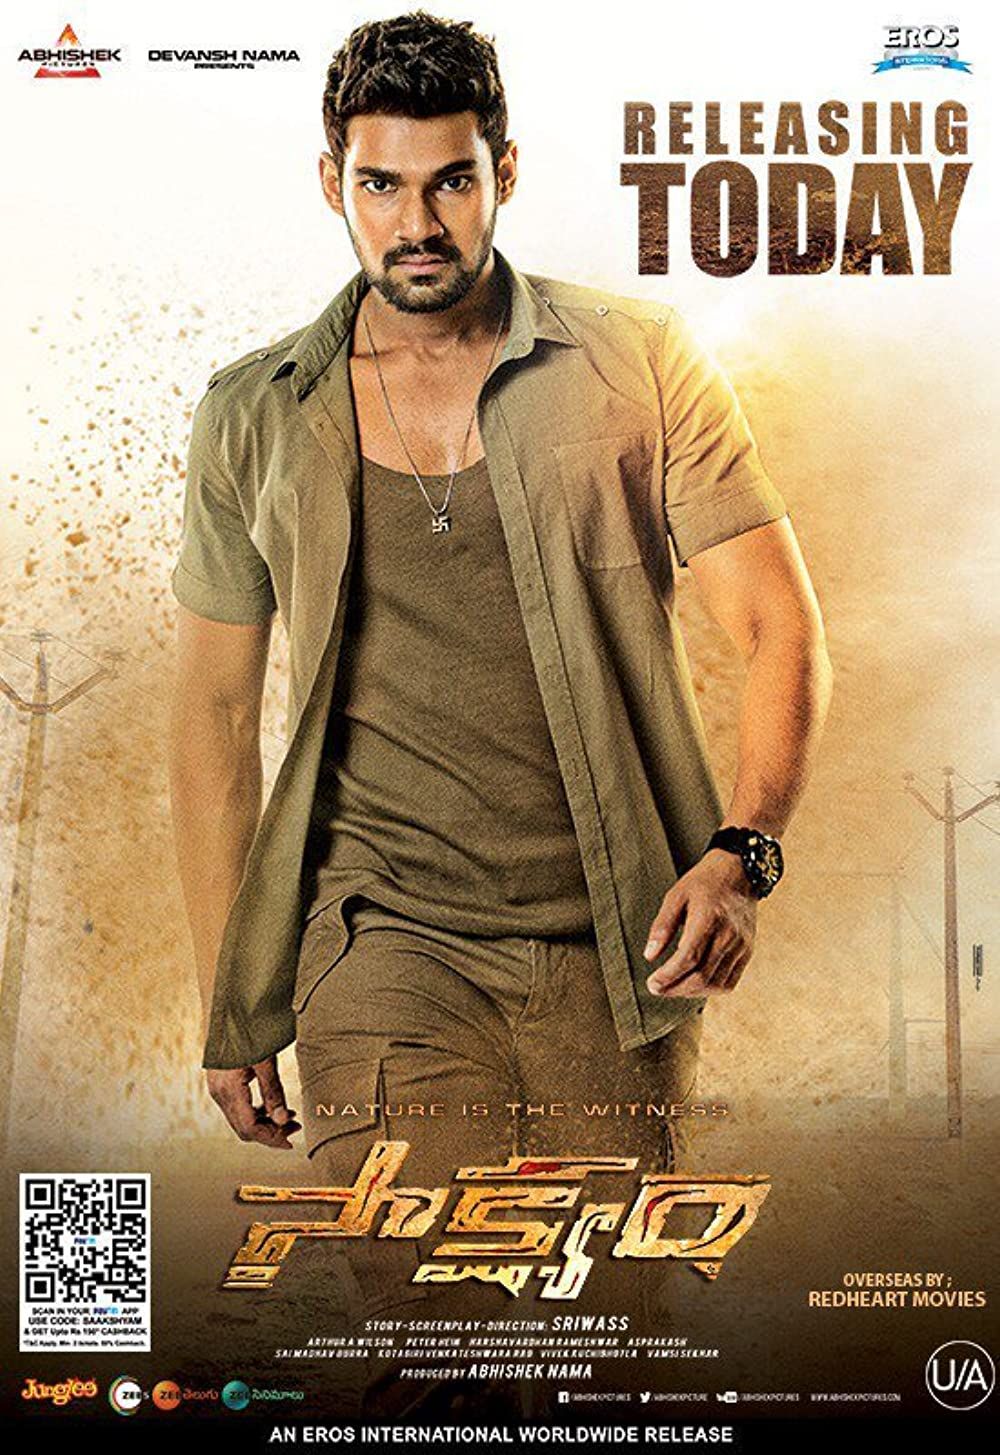 Pralay The Destroyer (Saakshyam) 2021 Hindi Dubbed HDRip download full movie